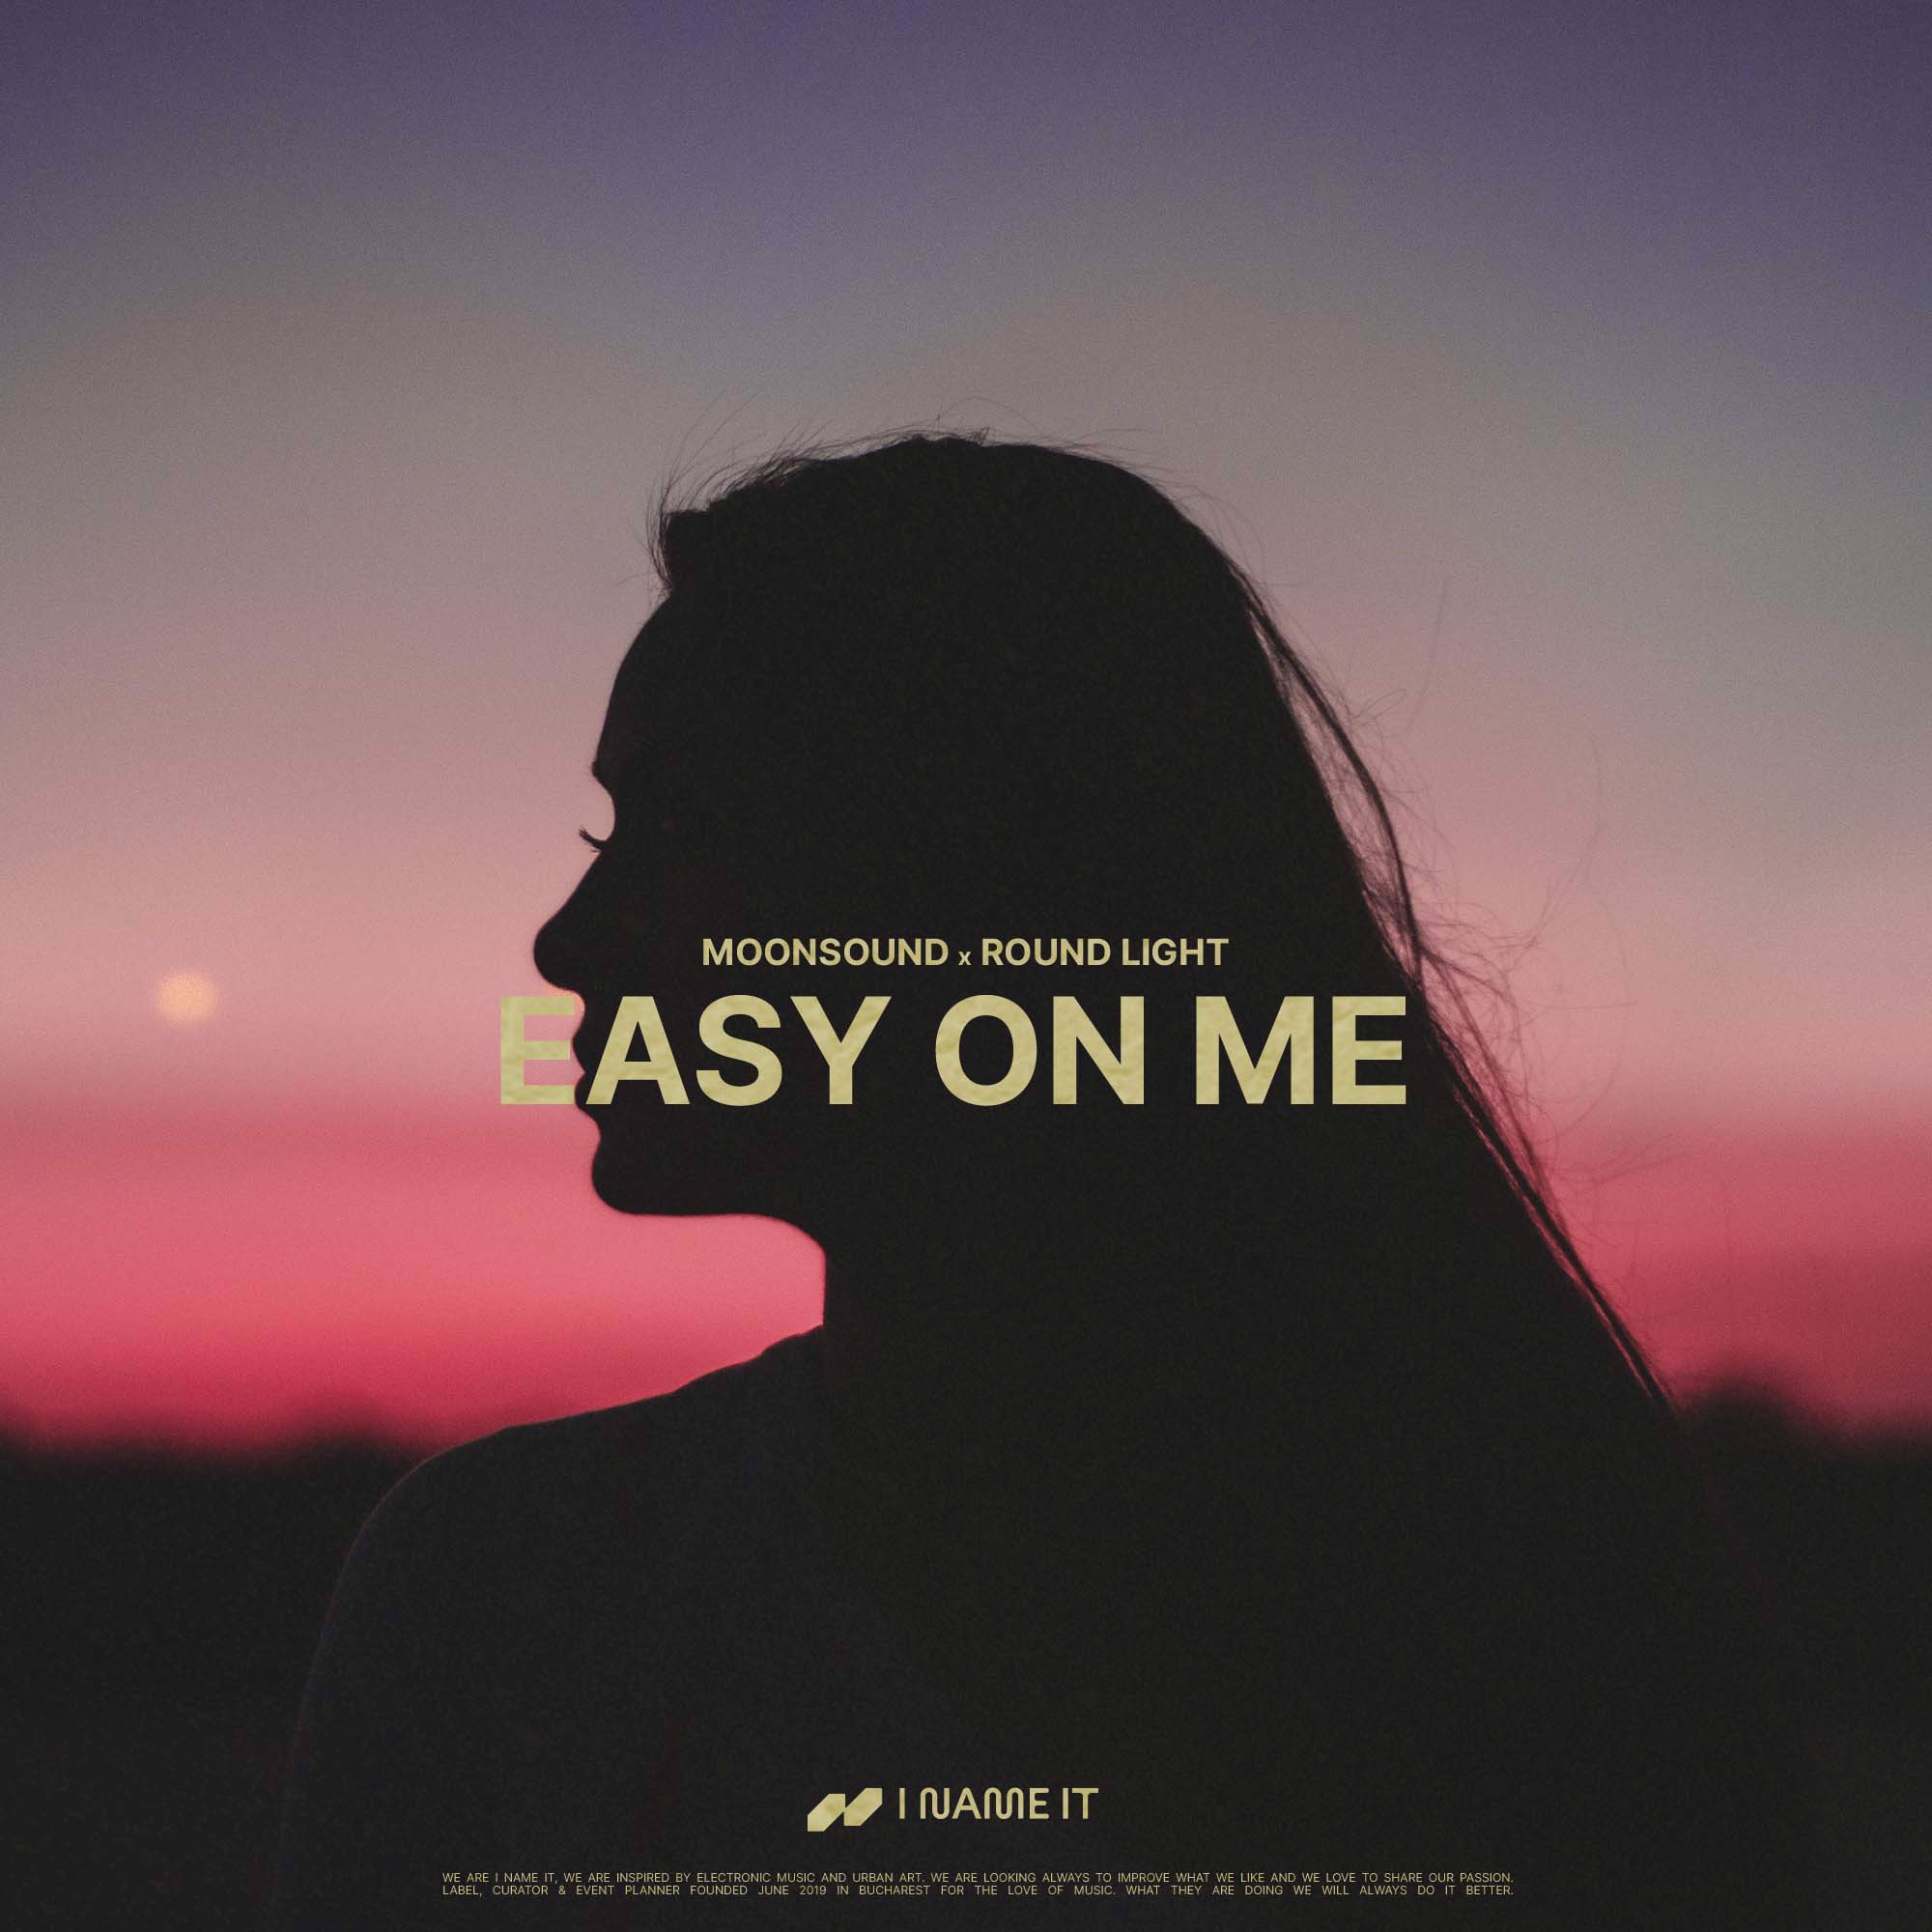 MoonSound x RoundLight – Easy on me